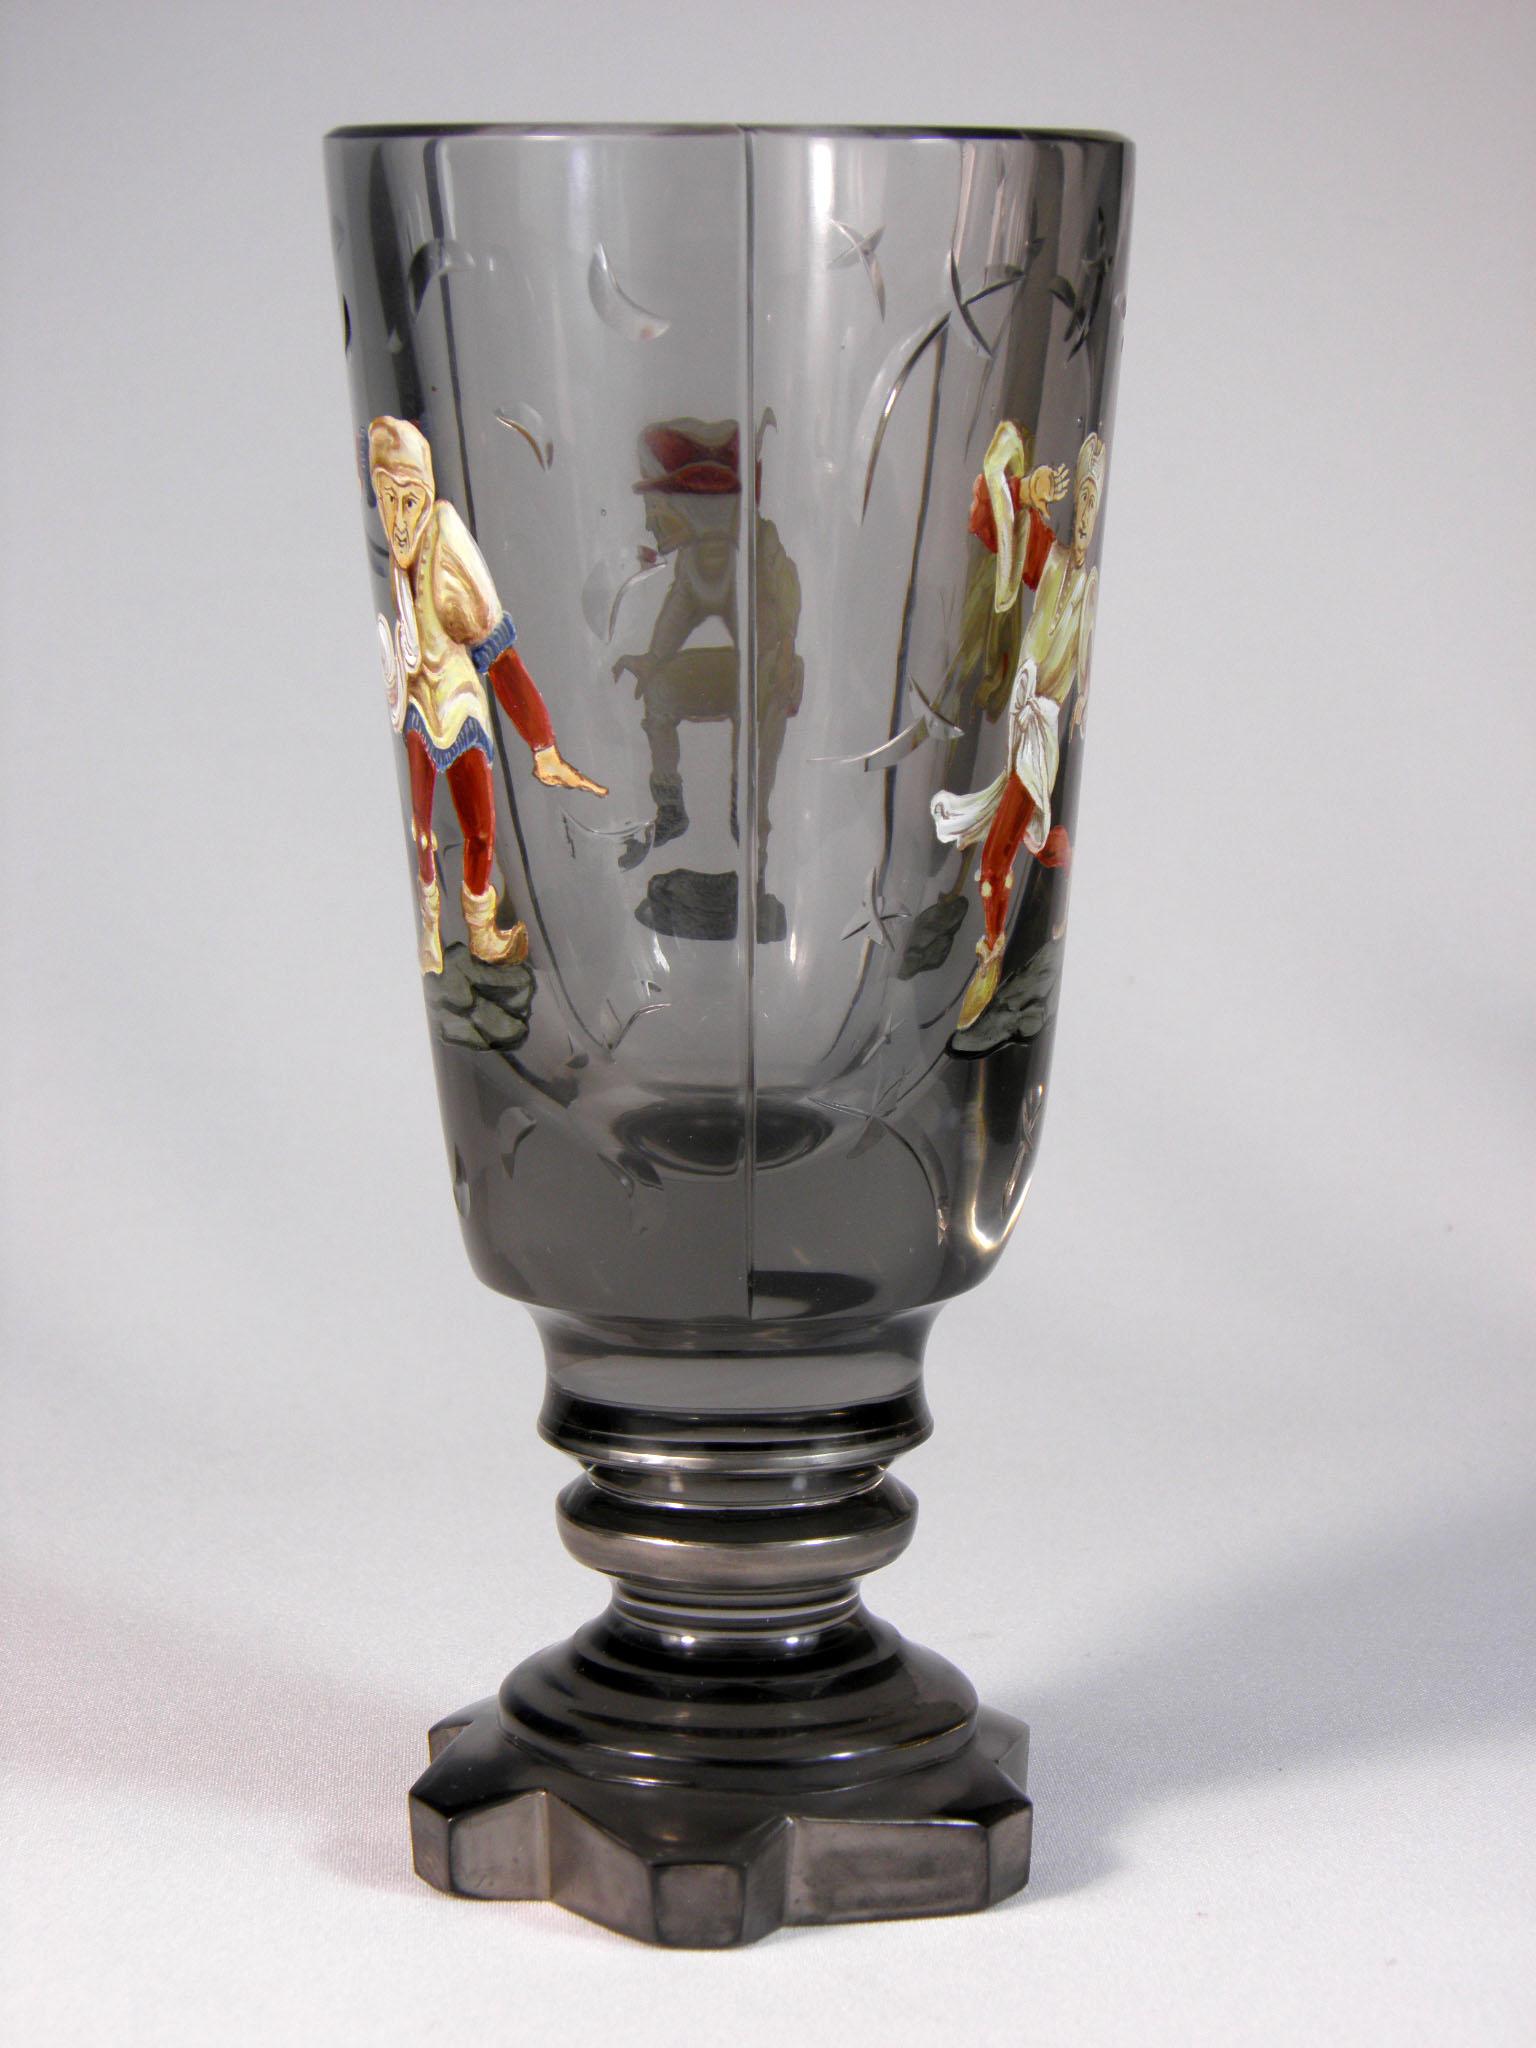 Hand cut, engraved and painted goblet in art deco style, hand silvered, made in France, 20th century, signature on the bottom.